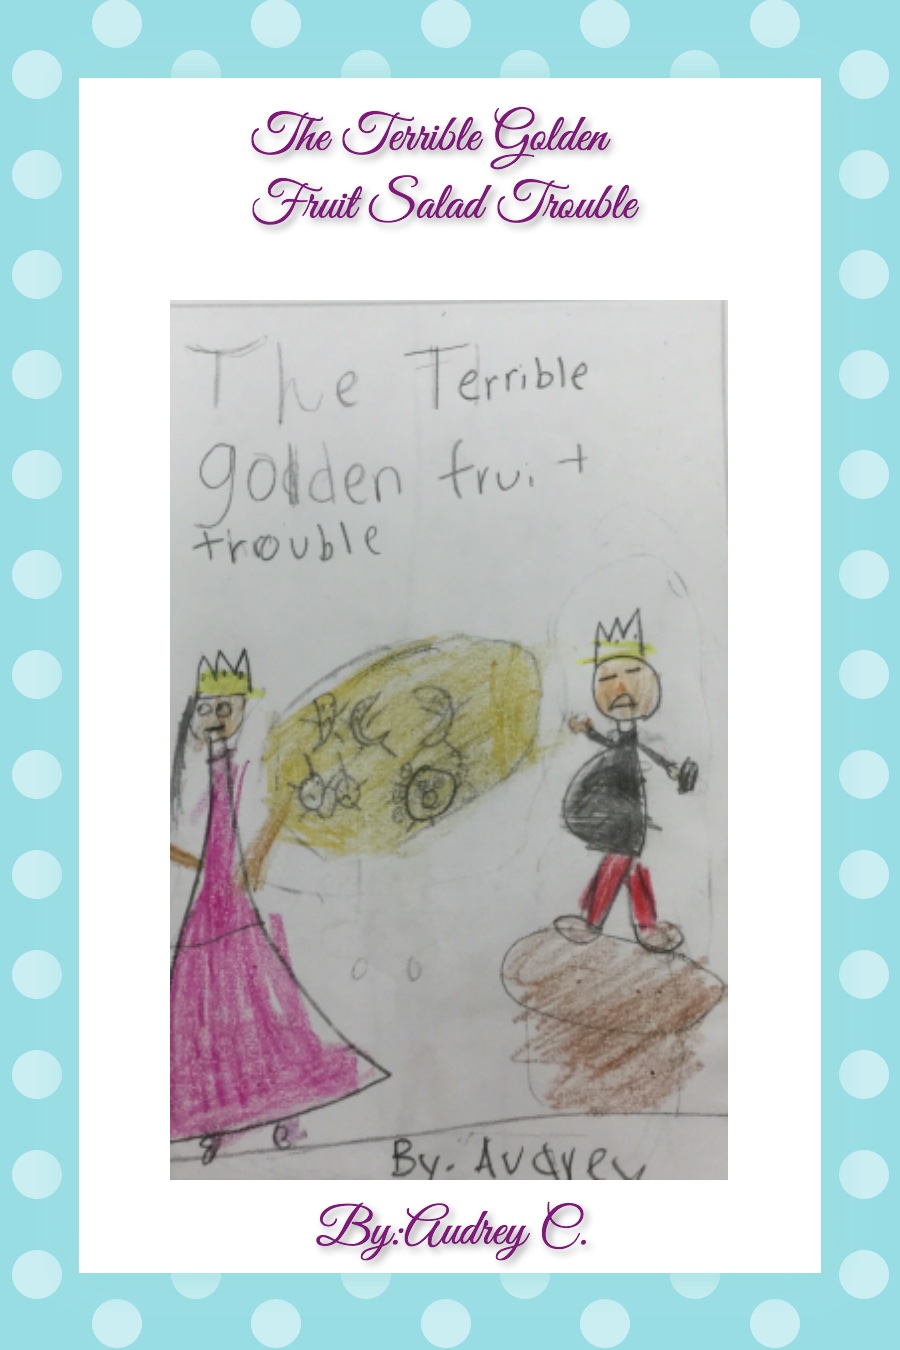 The Terrible Golden Fruit Trouble by Audrey C